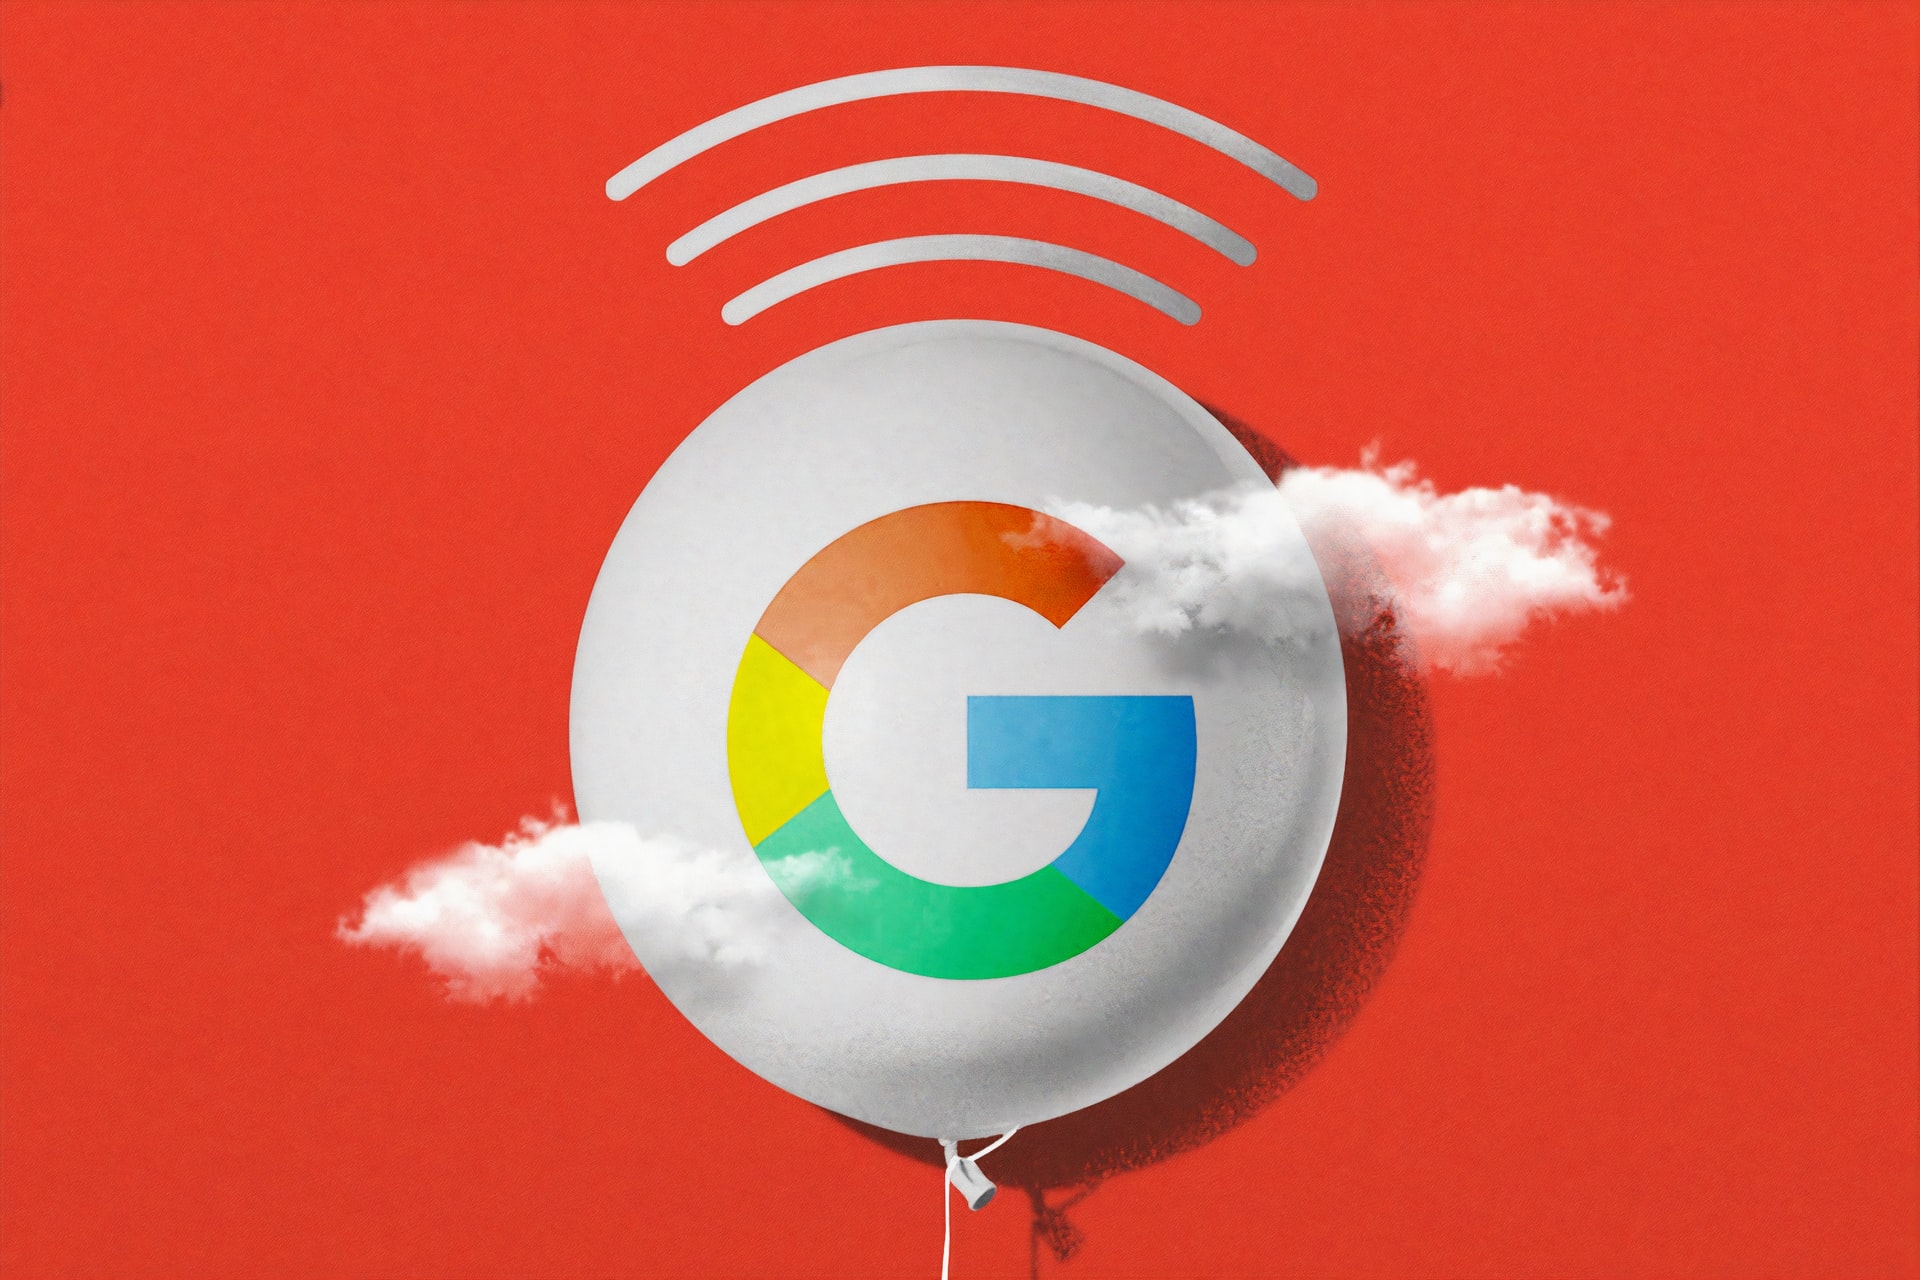 Google asks to test a new type of wireless broadband